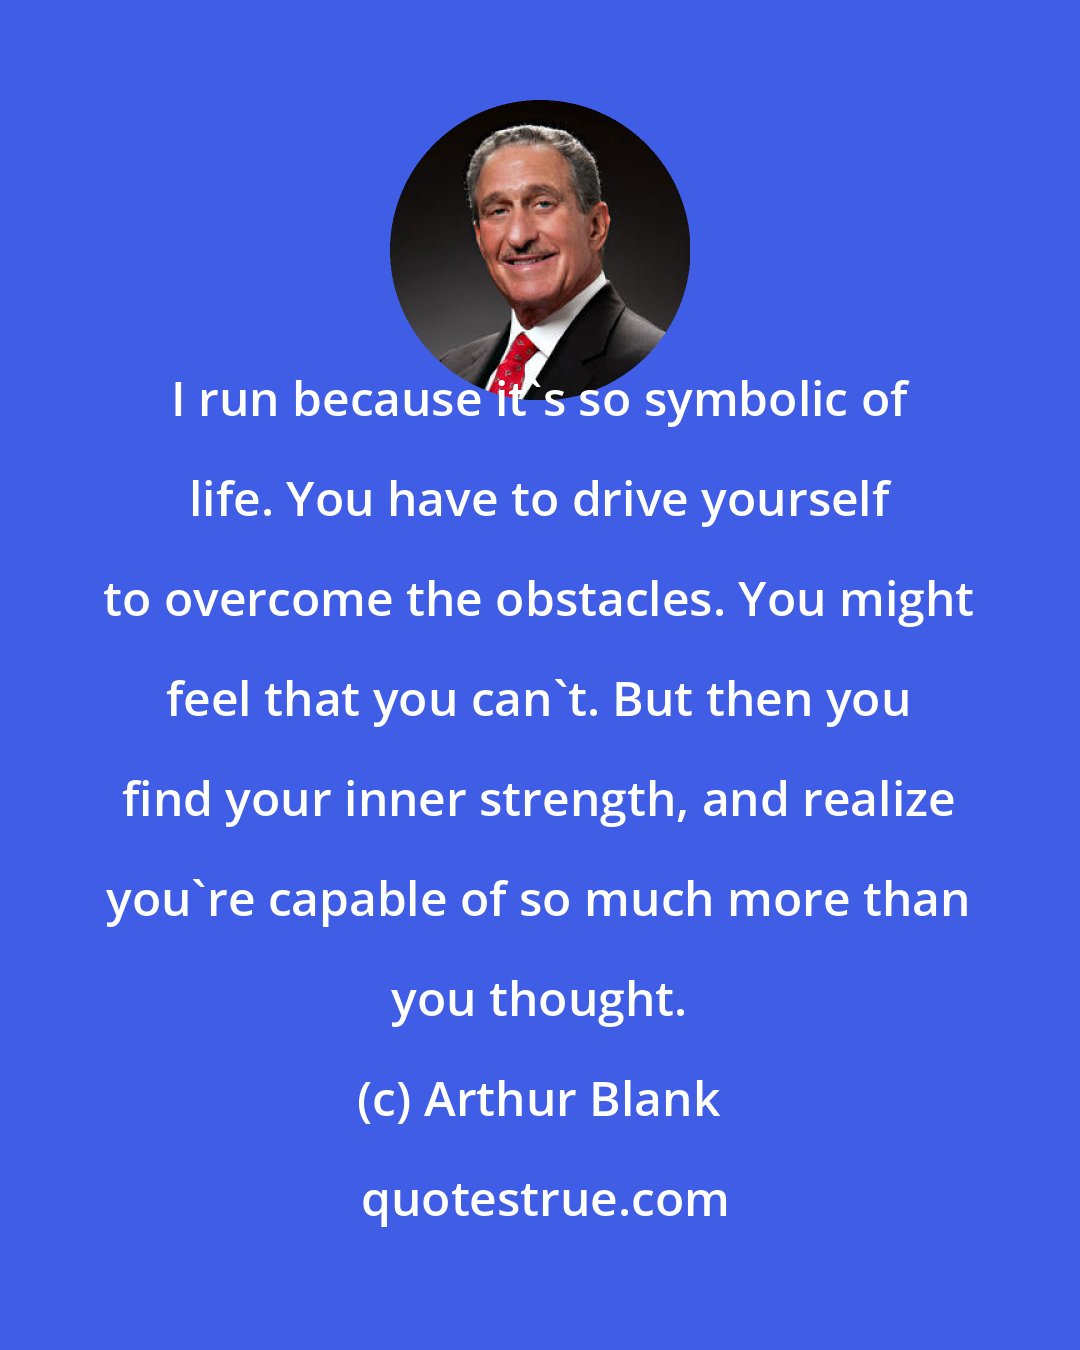 Arthur Blank: I run because it's so symbolic of life. You have to drive yourself to overcome the obstacles. You might feel that you can't. But then you find your inner strength, and realize you're capable of so much more than you thought.